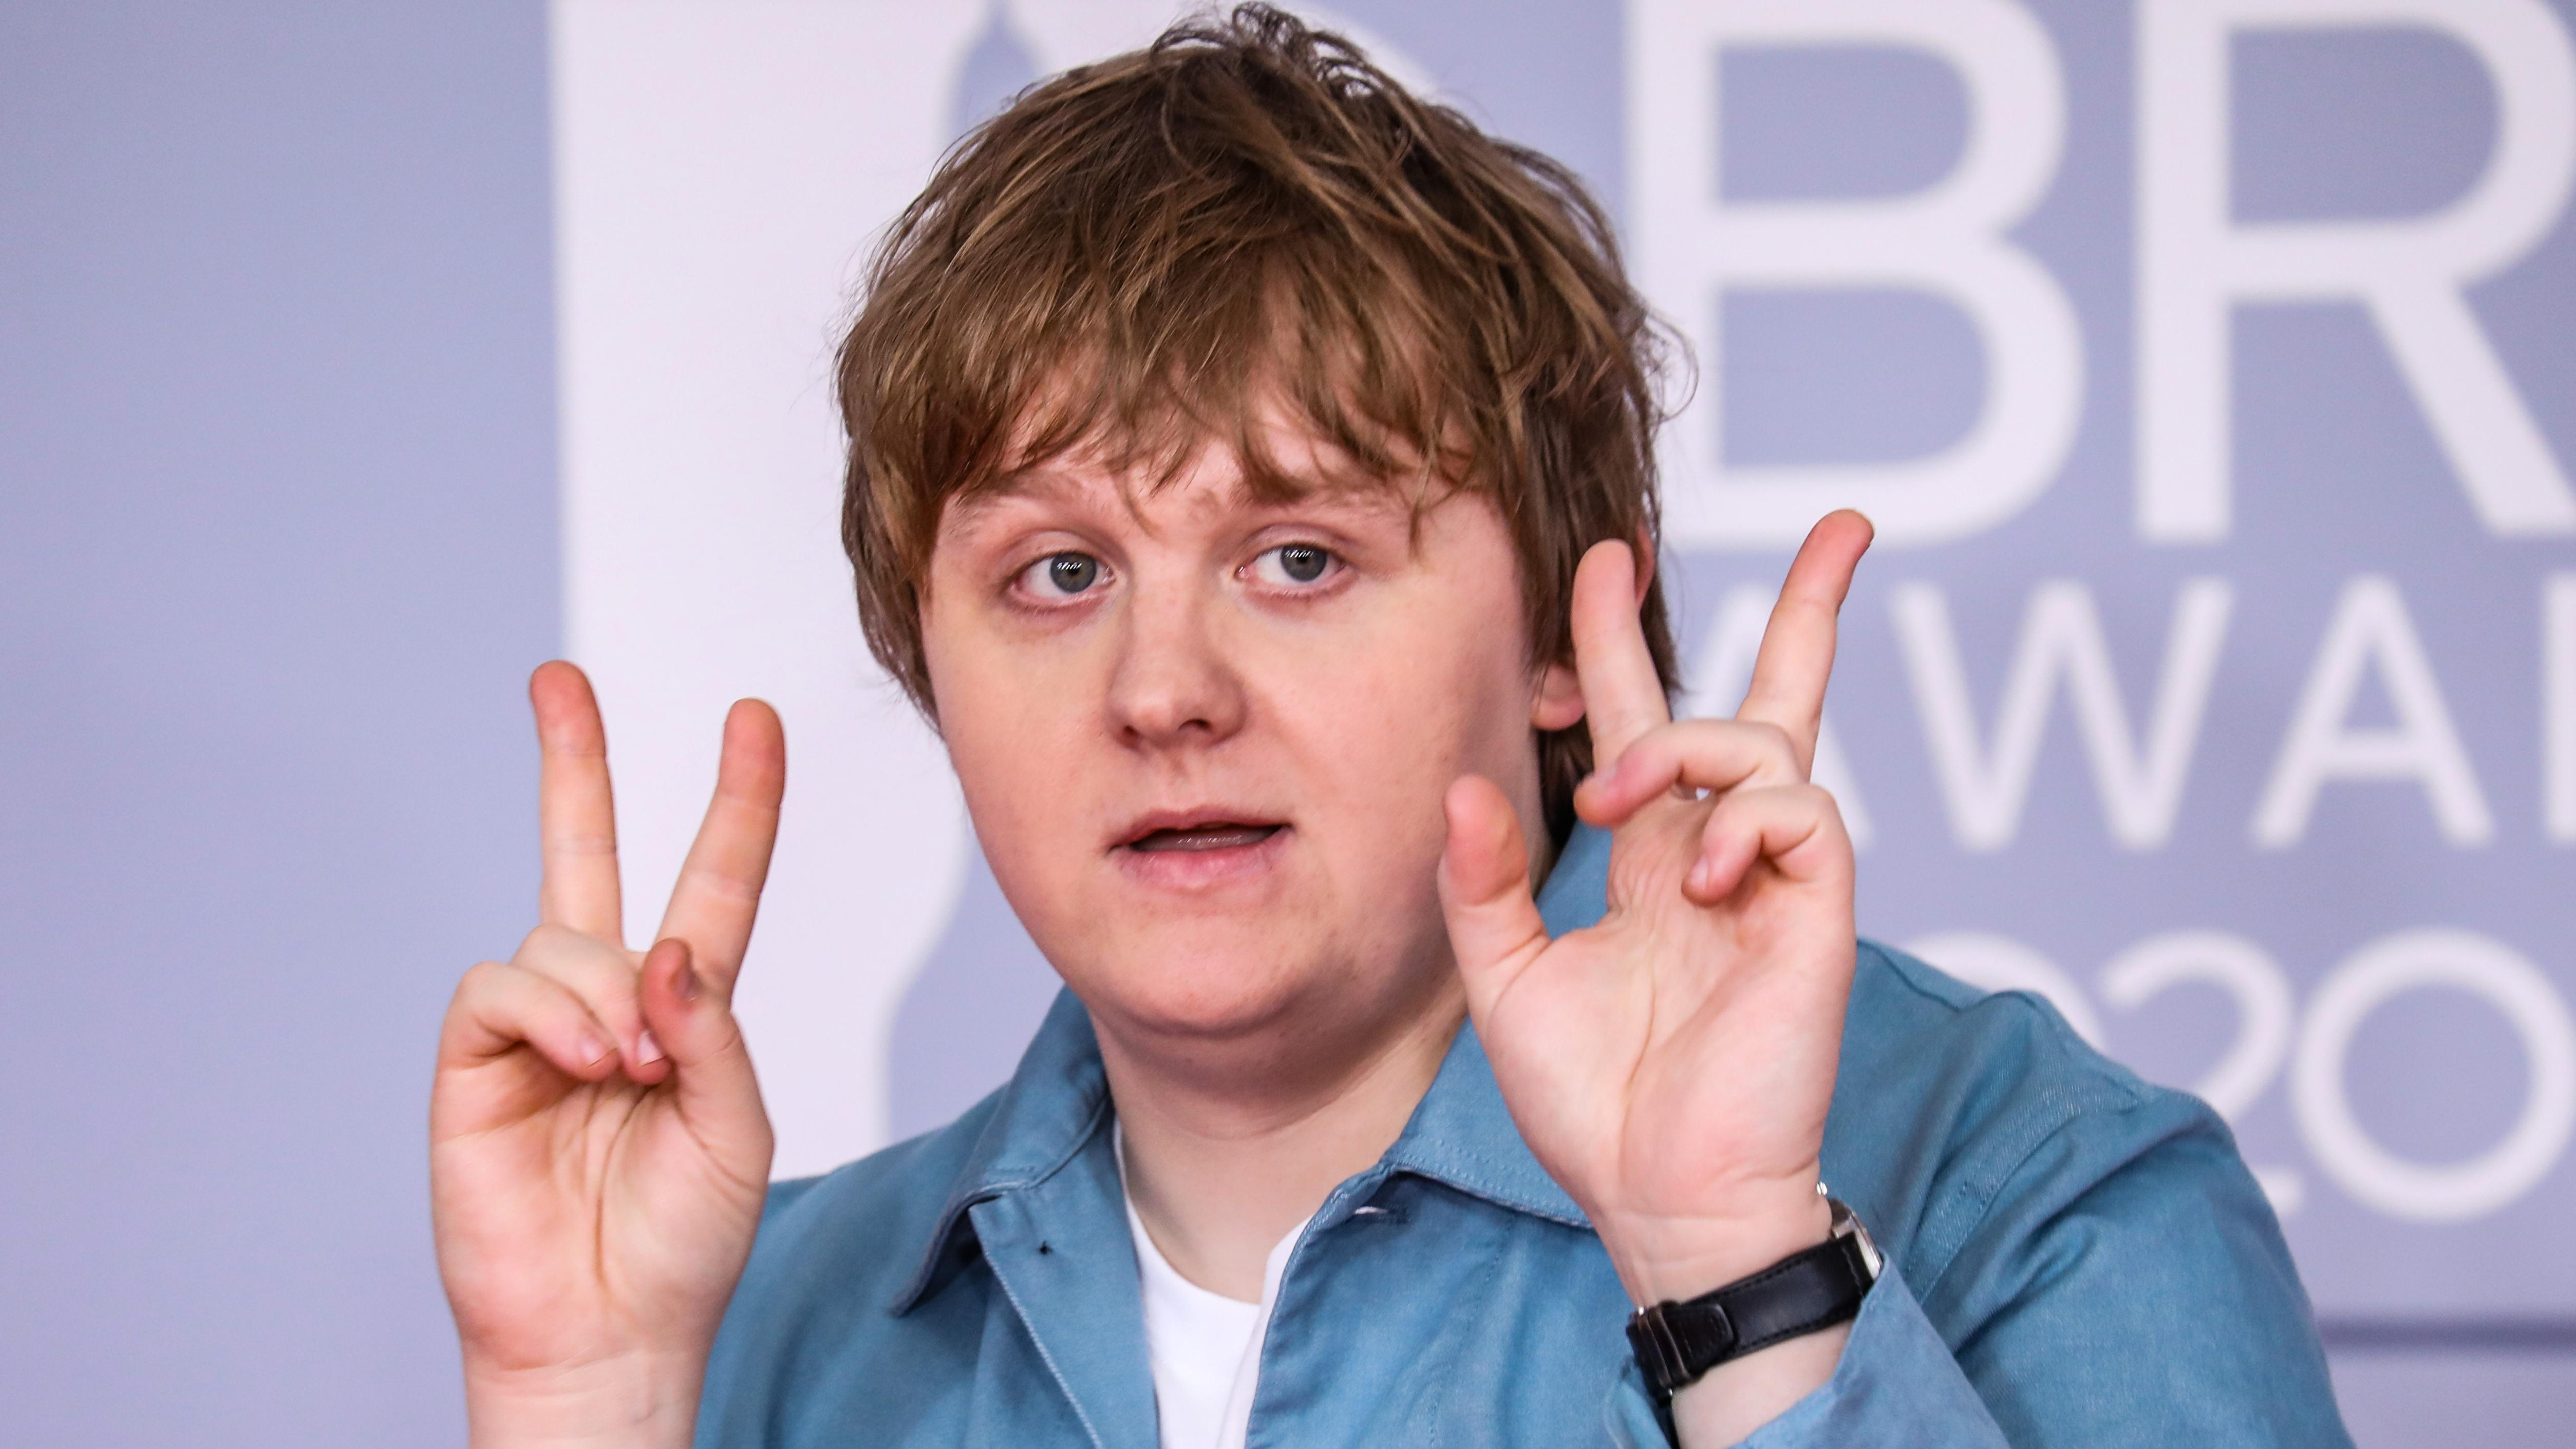 Lewis Capaldi Net Worth - A Rising Star With A Soulful Voice